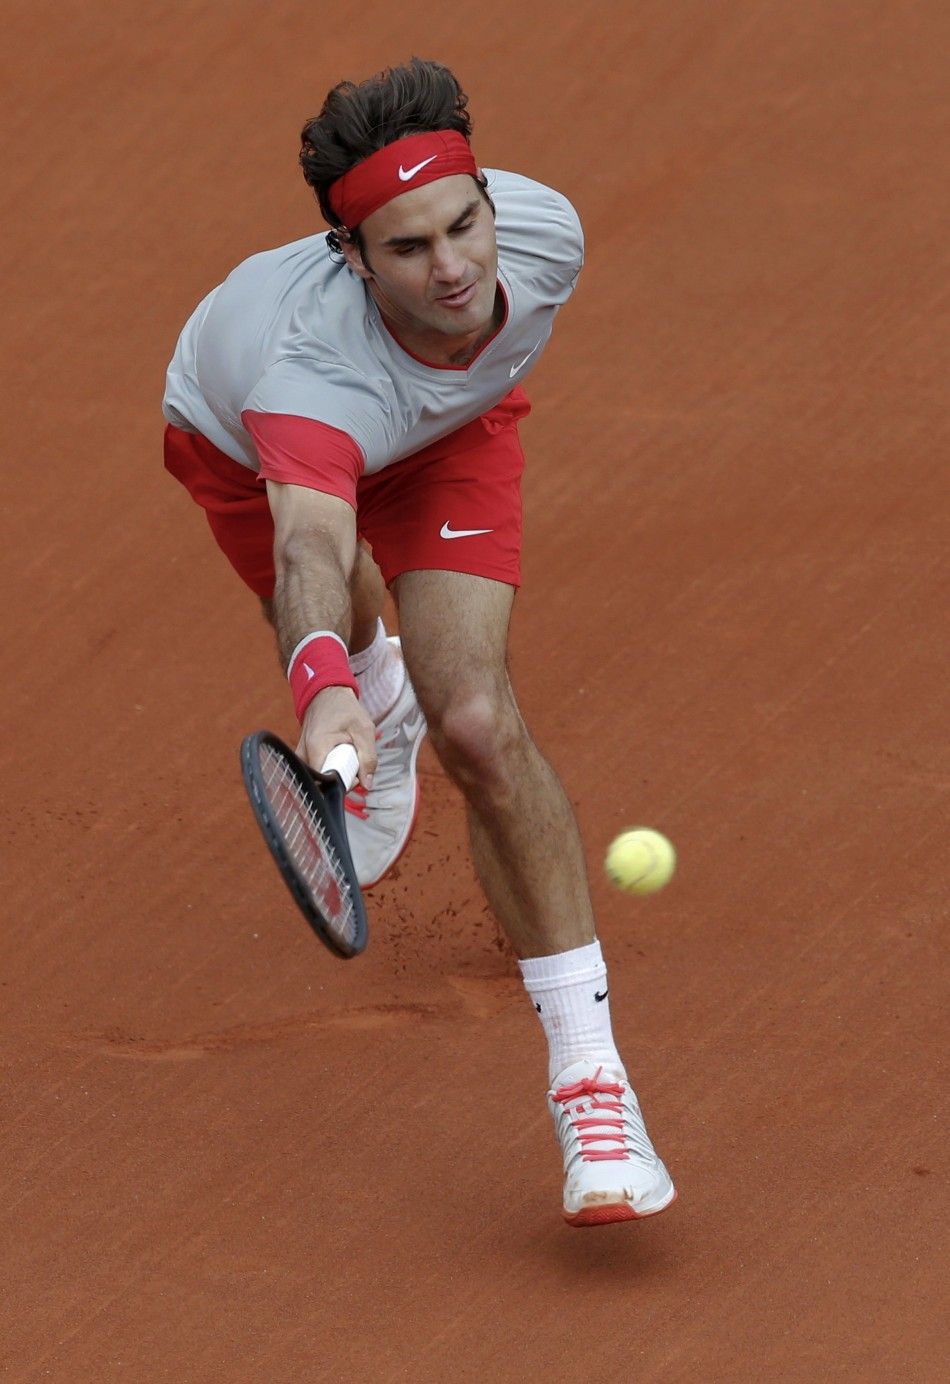 Roger Federer of Switzerland returns the ball to Ernests Gulbis of Latvia during their mens singles match at the French Open tennis tournament at the Roland Garros stadium in Paris June 1, 2014.